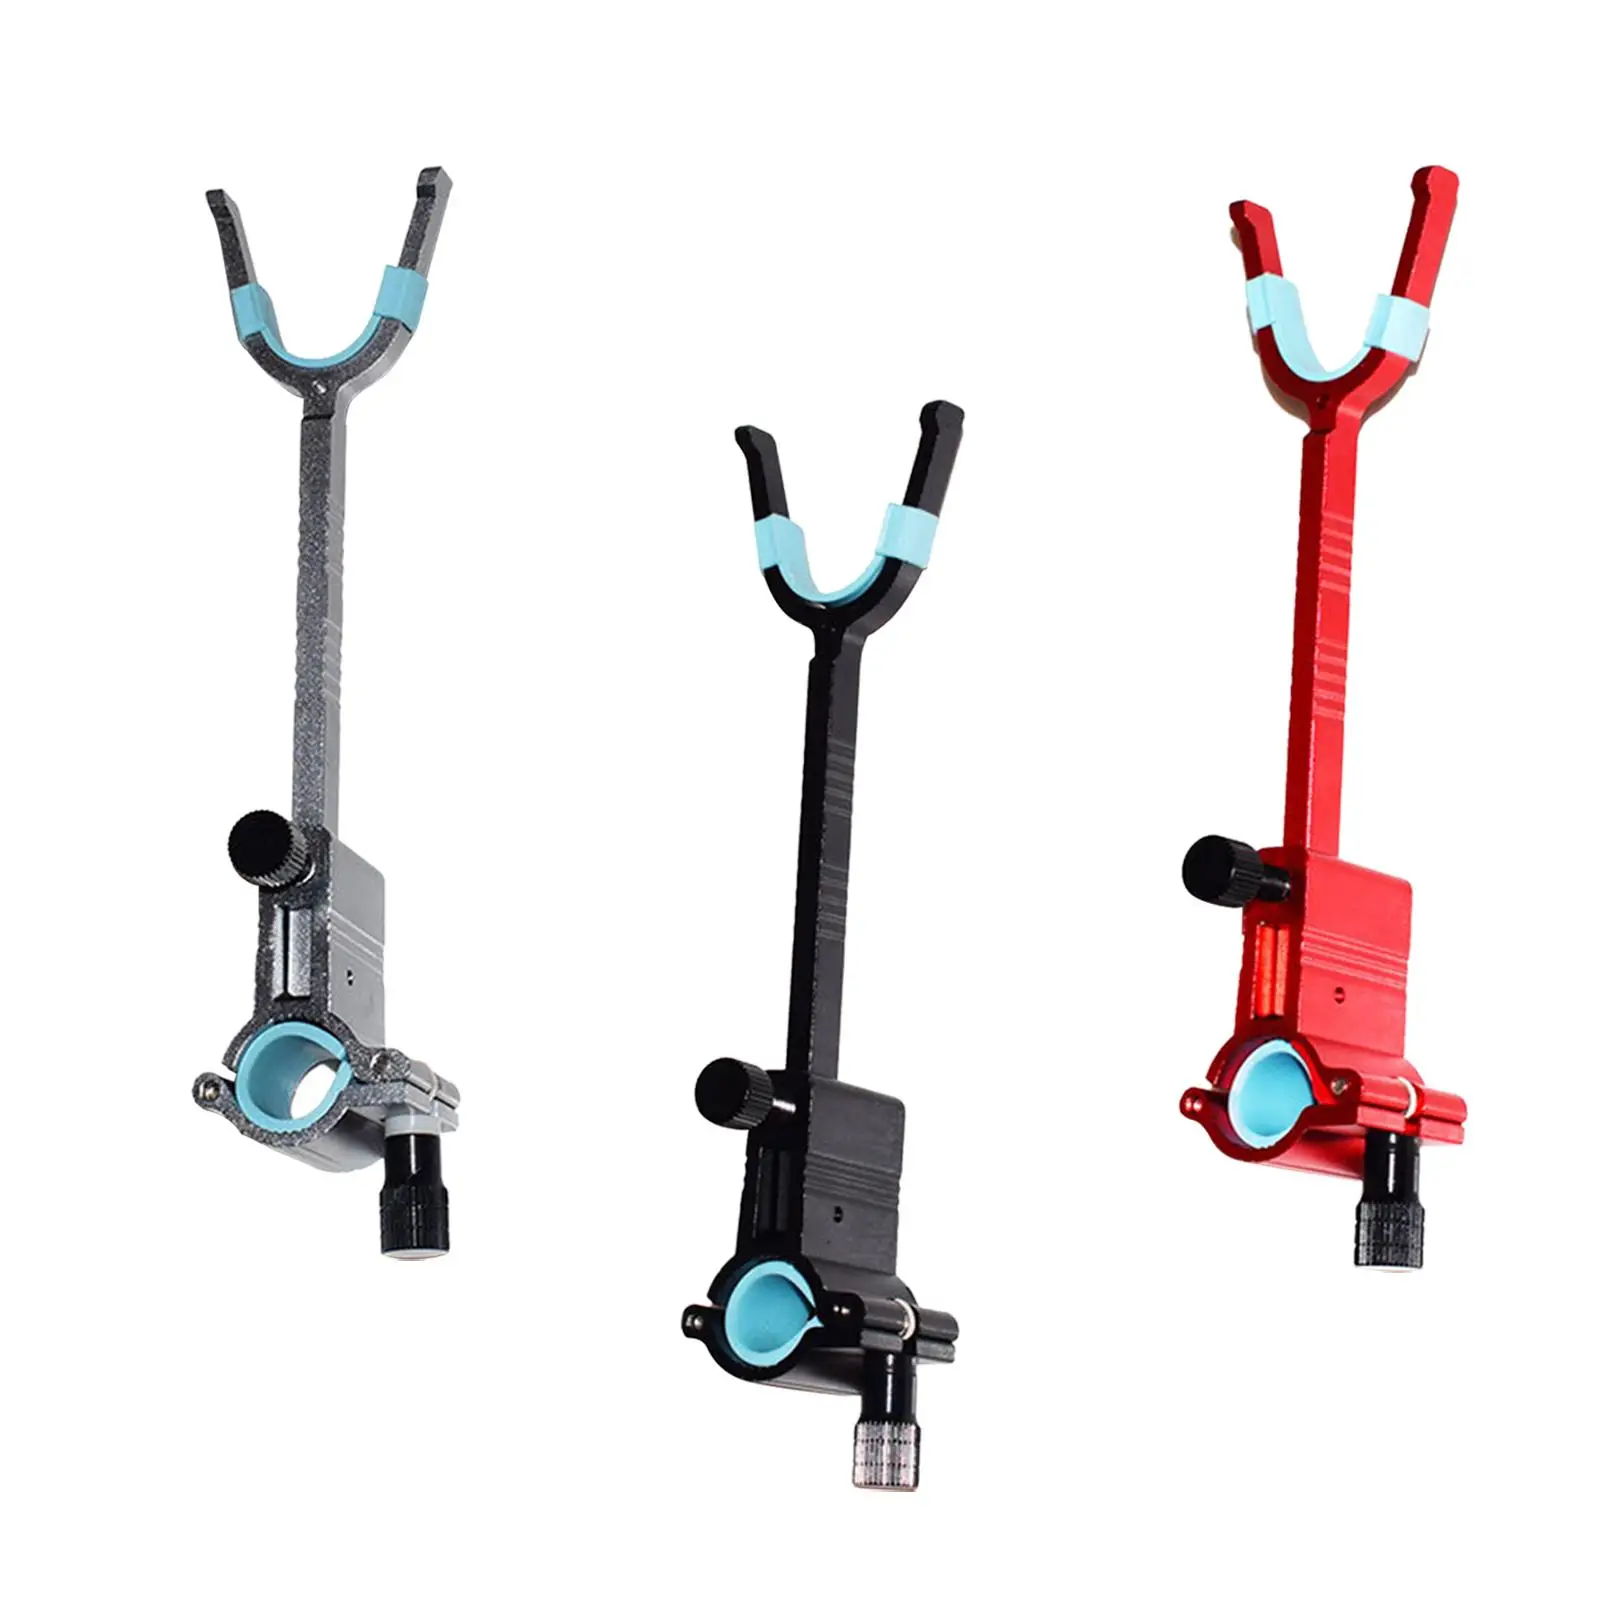 Rod Holders for Bank Fishing Support Fishing Grip Tail Head Rest Holder Fishing Rod Rack for Boat Outdoor Fishing Tackle